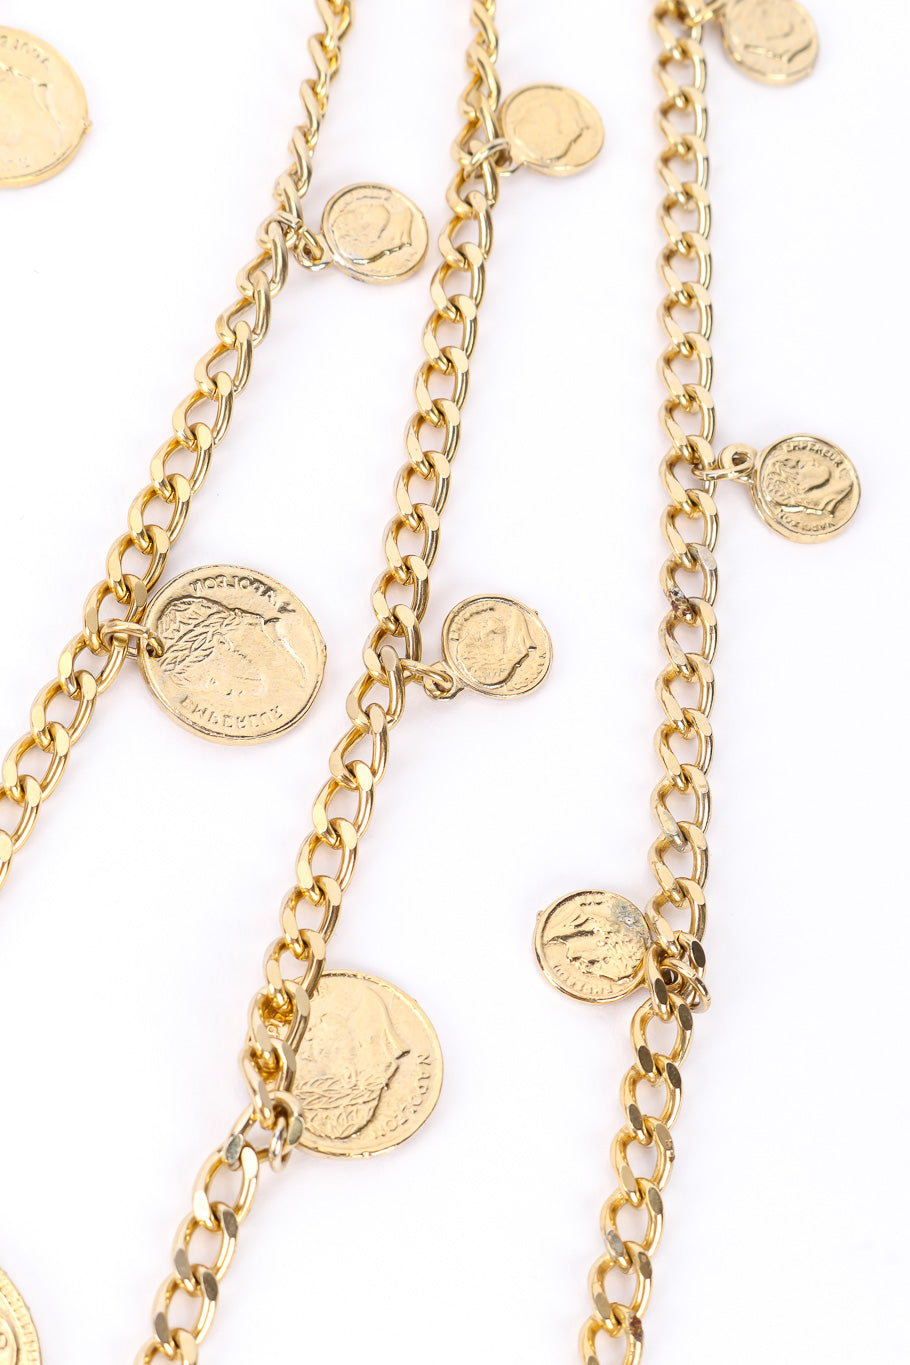 Coin pendant necklace by Goldette on white background 3 vertical coin strands @recessla